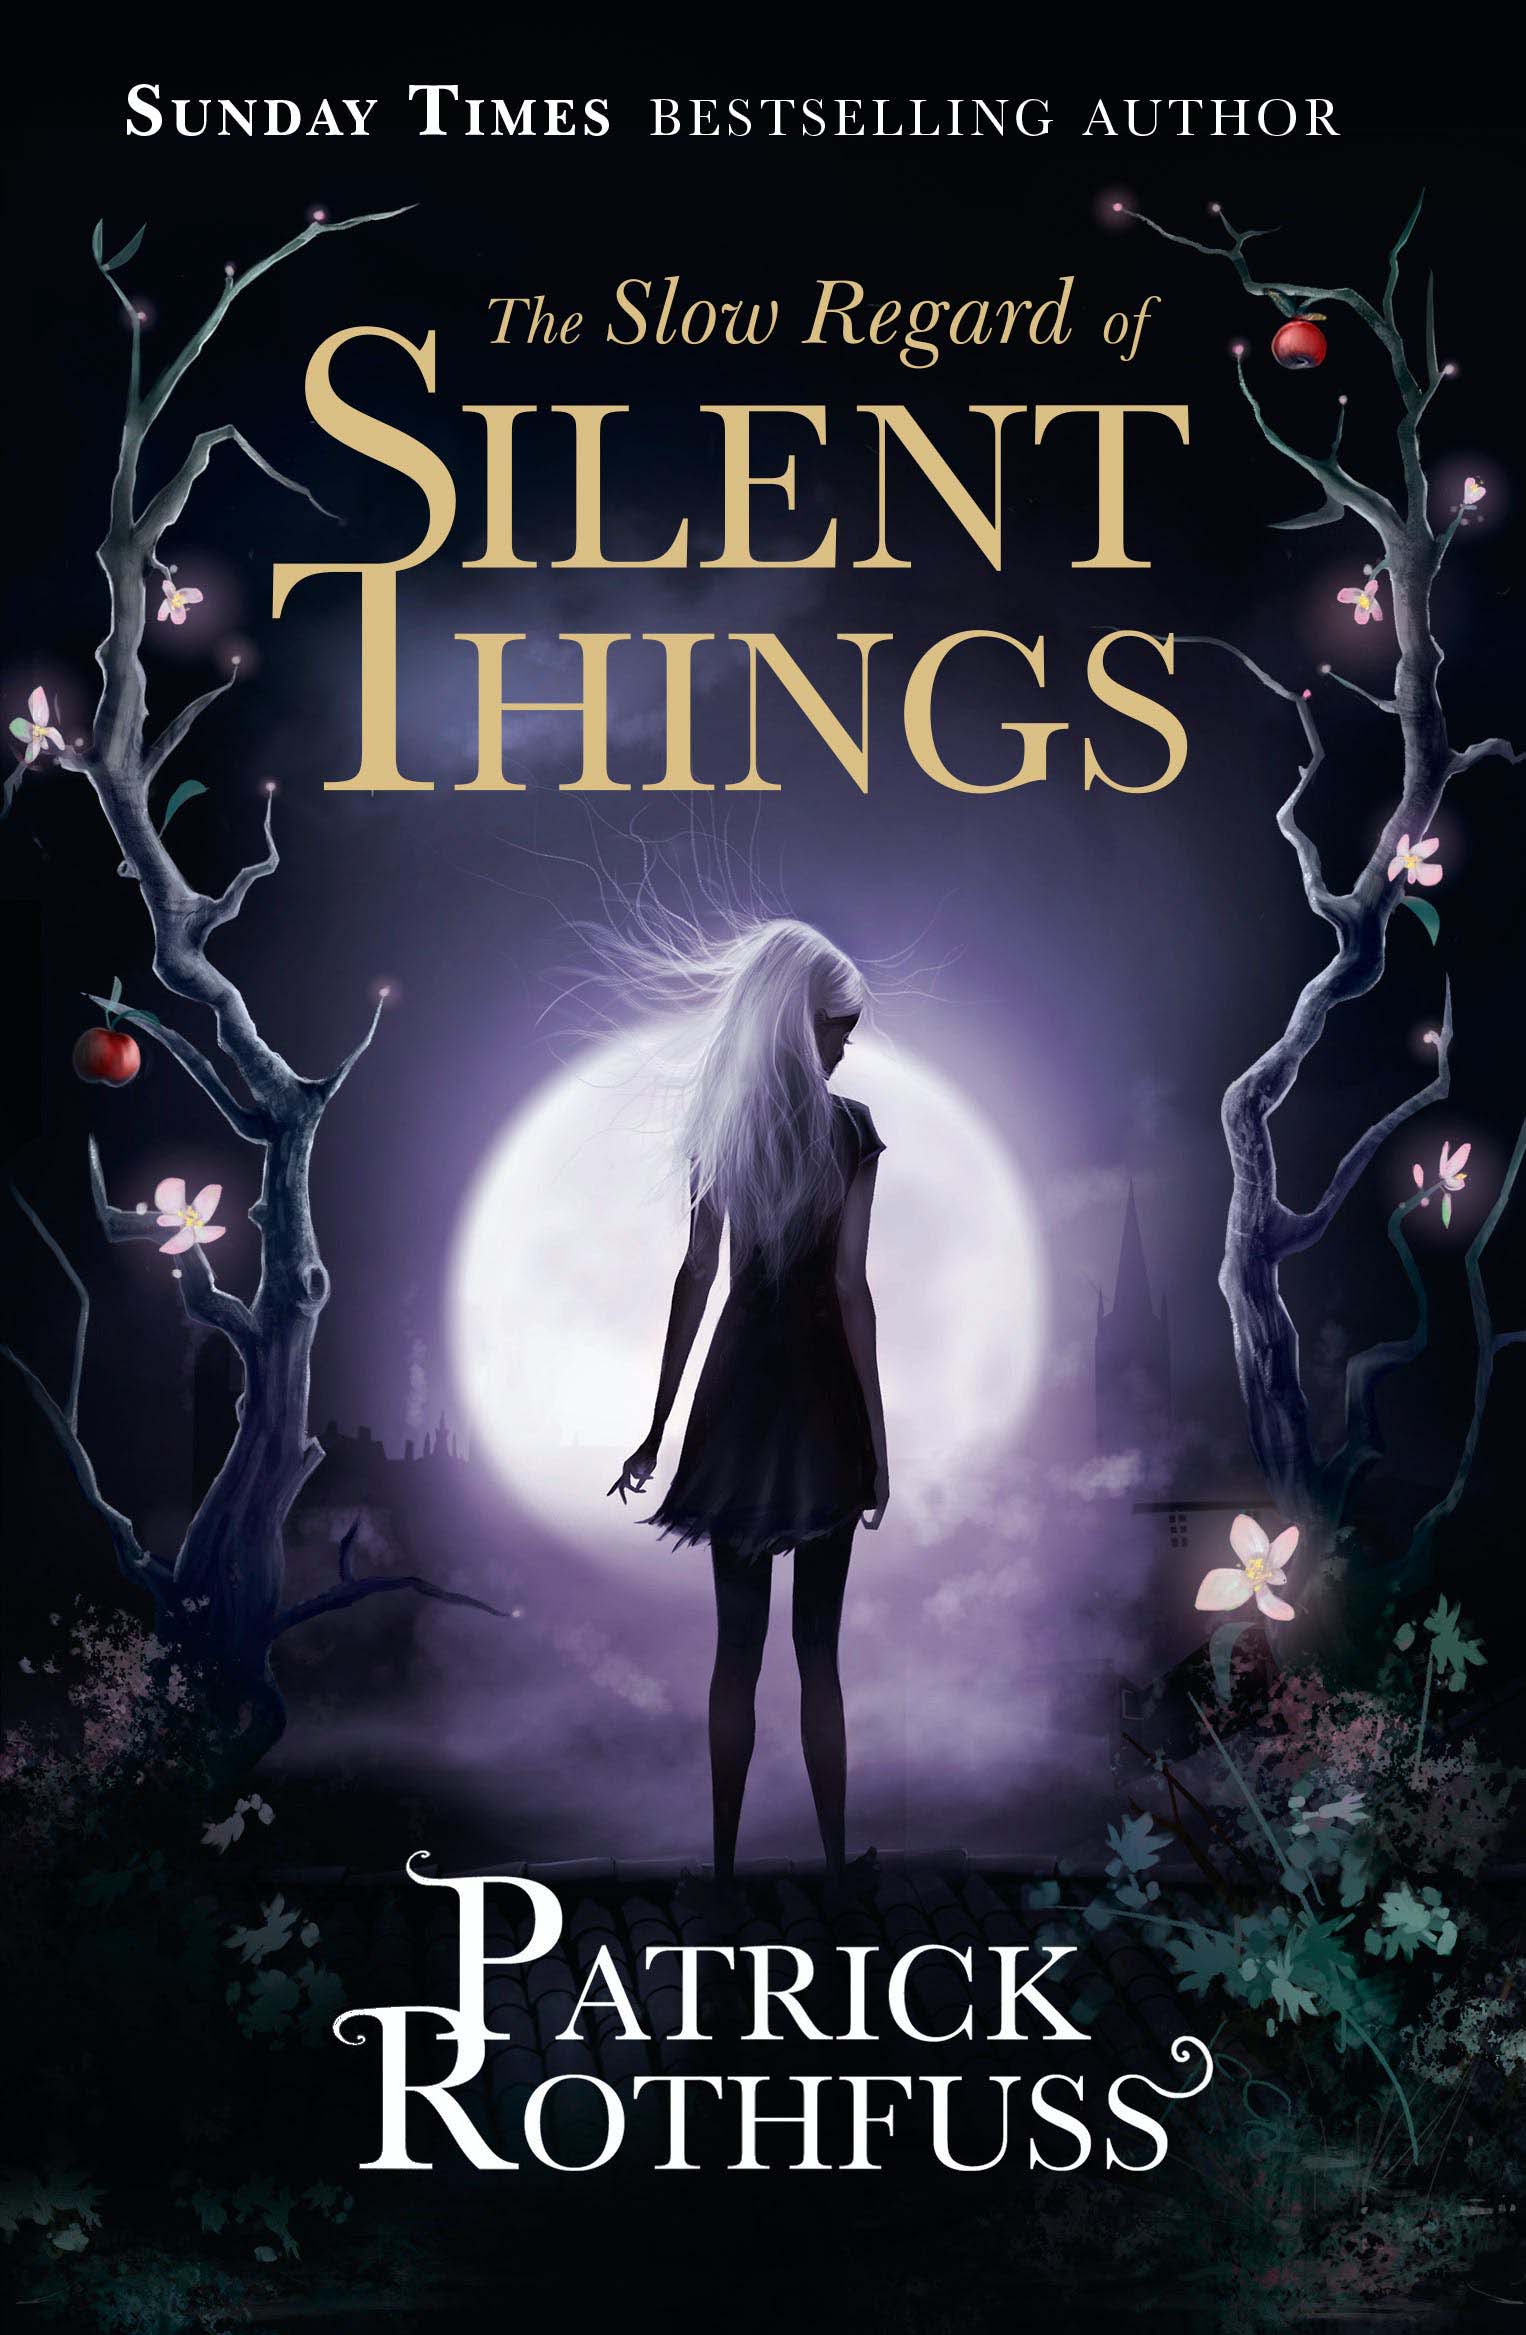 Kingkiller Chronicle: The Slow Regard of Silent Things